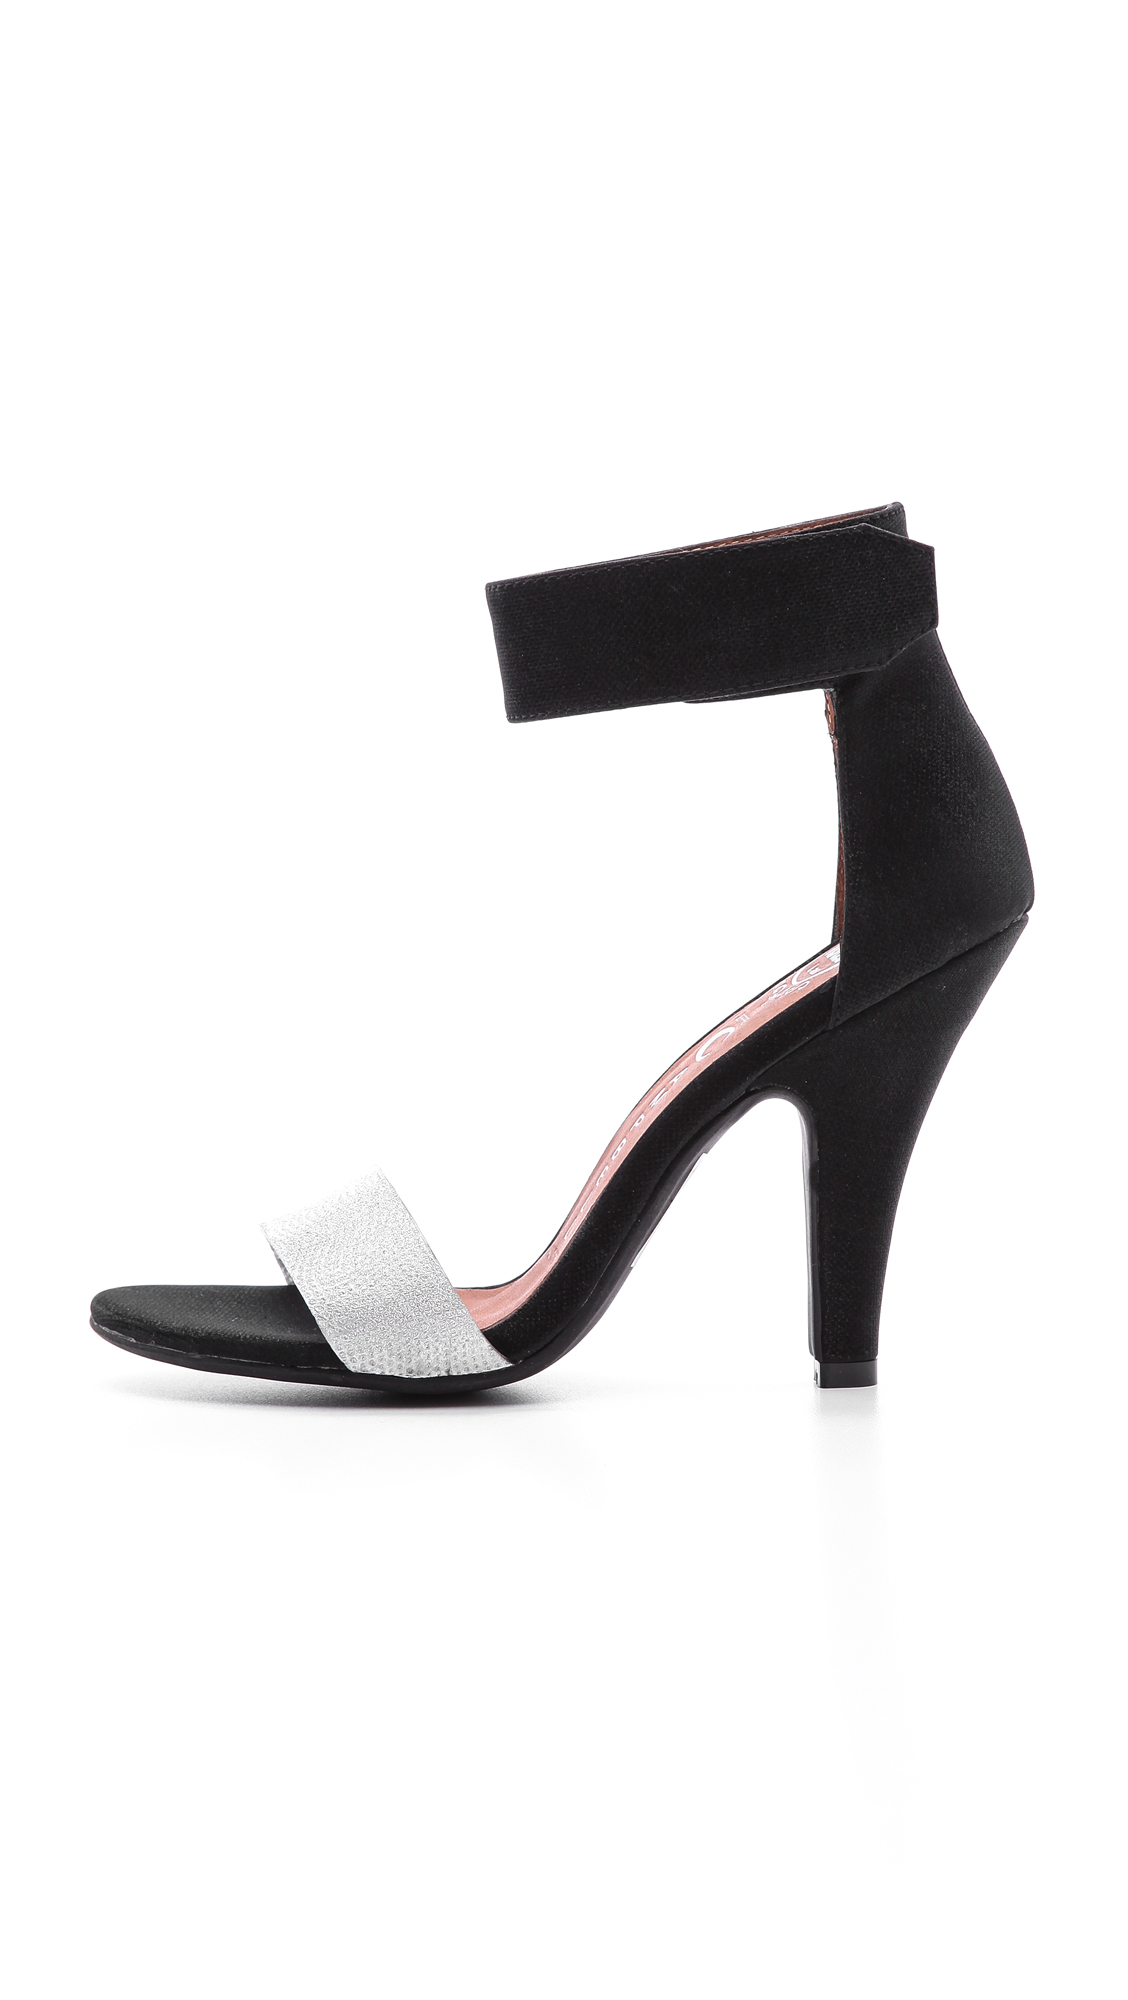 Jeffrey campbell Hough Ankle Strap Sandals in Black | Lyst